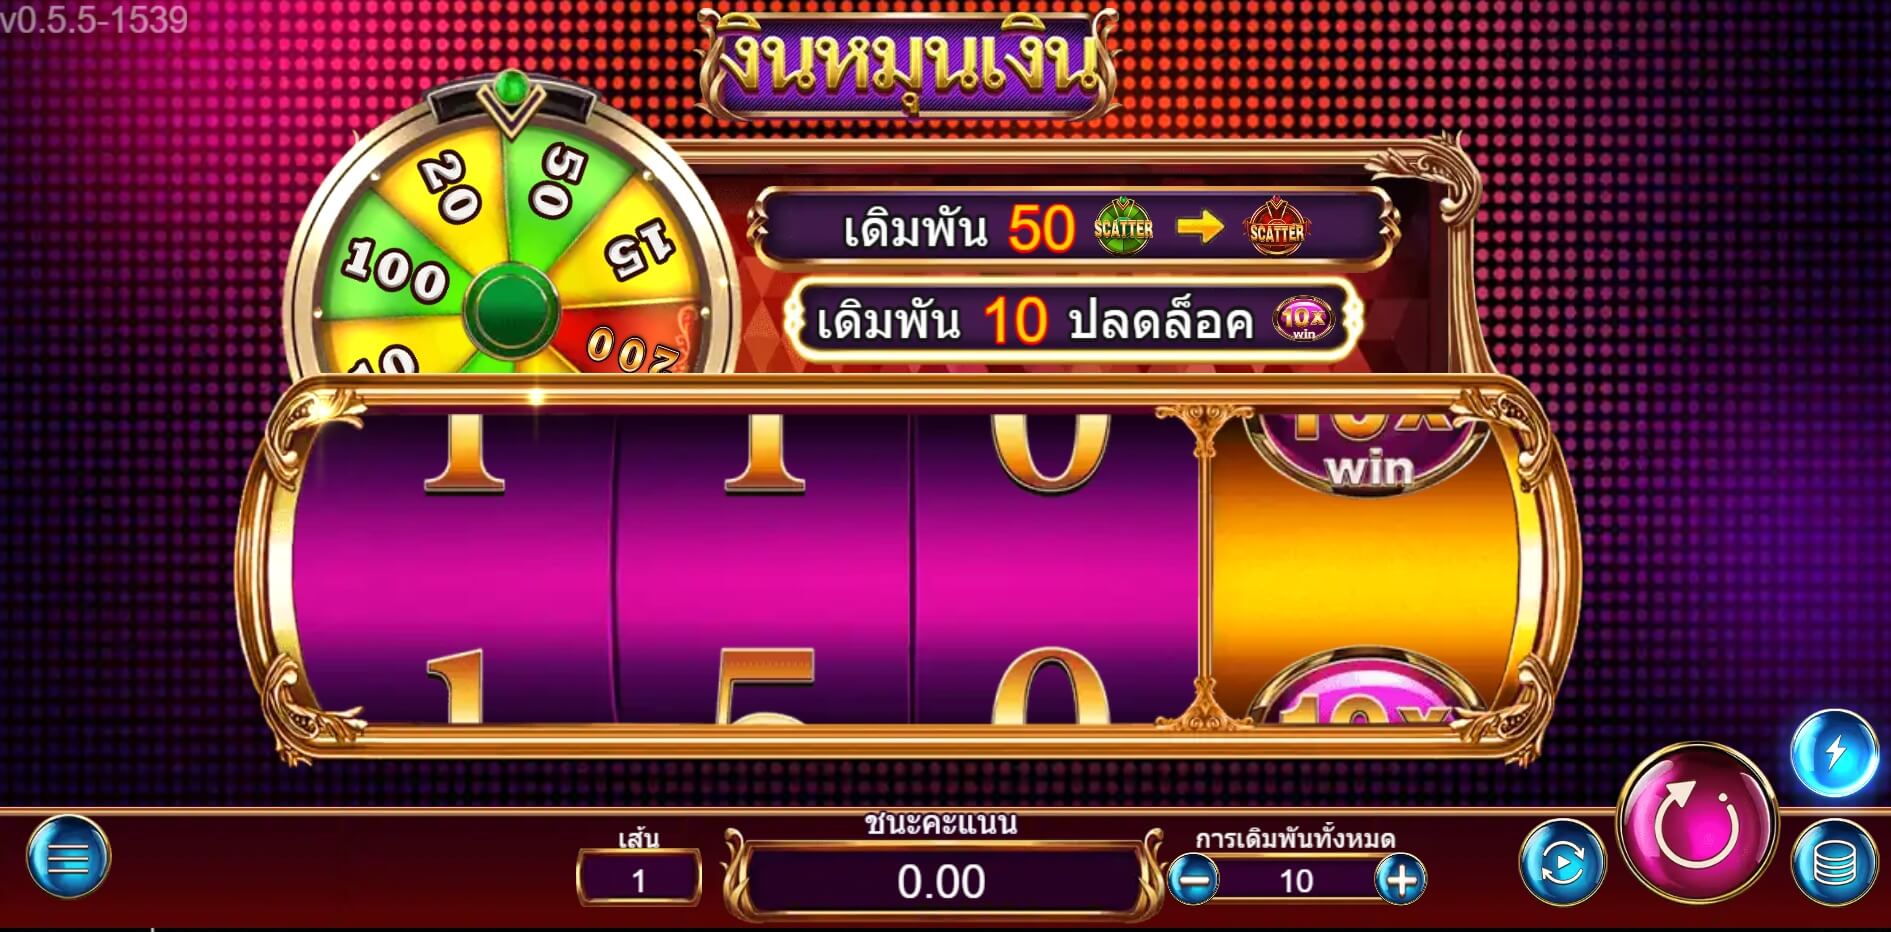 Roll in Money สล็อต Ambbet AMB Superslot